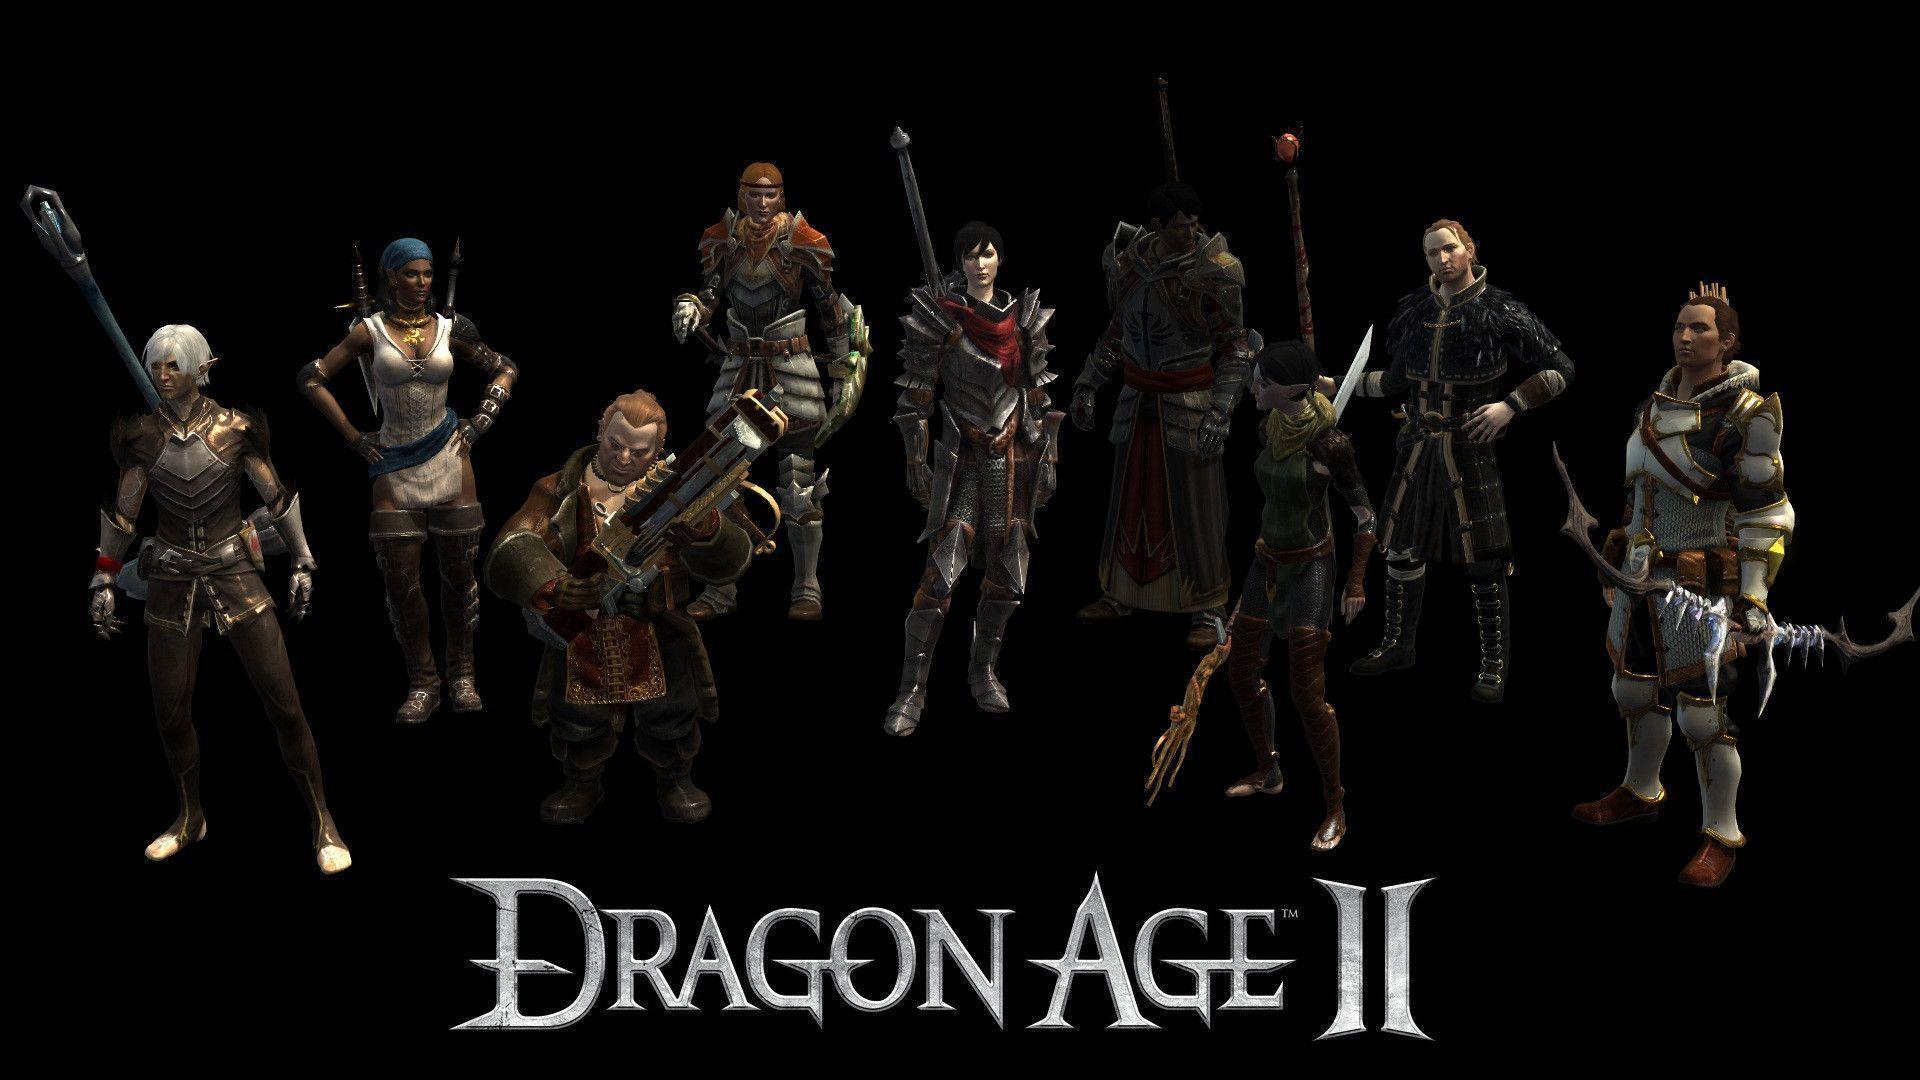 Dragon Age 2 Wallpapers HD - Wallpaper Cave